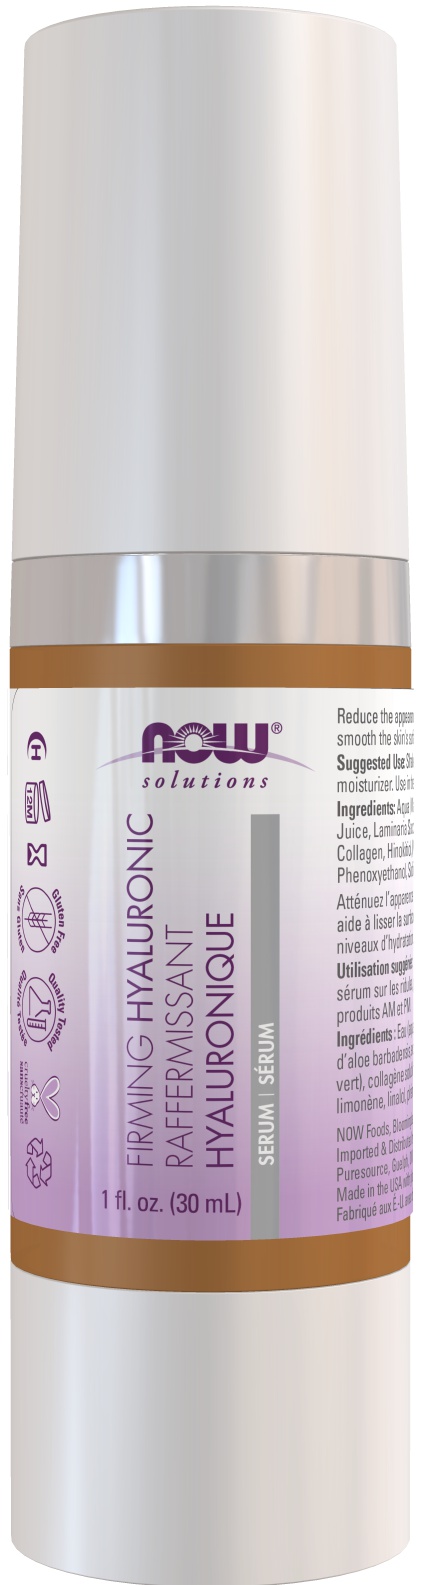 Now Foods Solutions Hyaluronic Acid Firming Serum